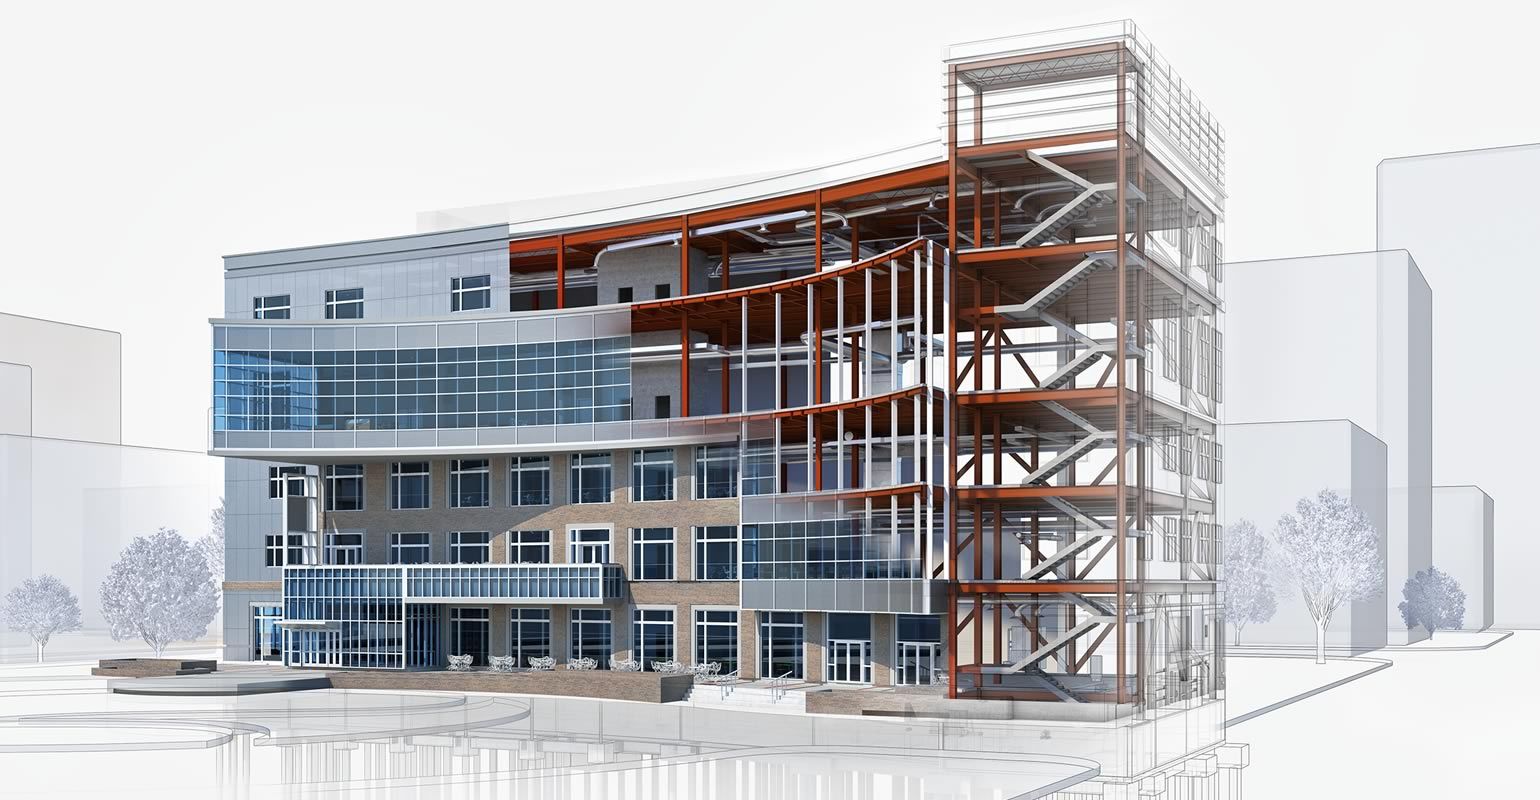 A 3D model for BIM workflow created and rendered in Revit